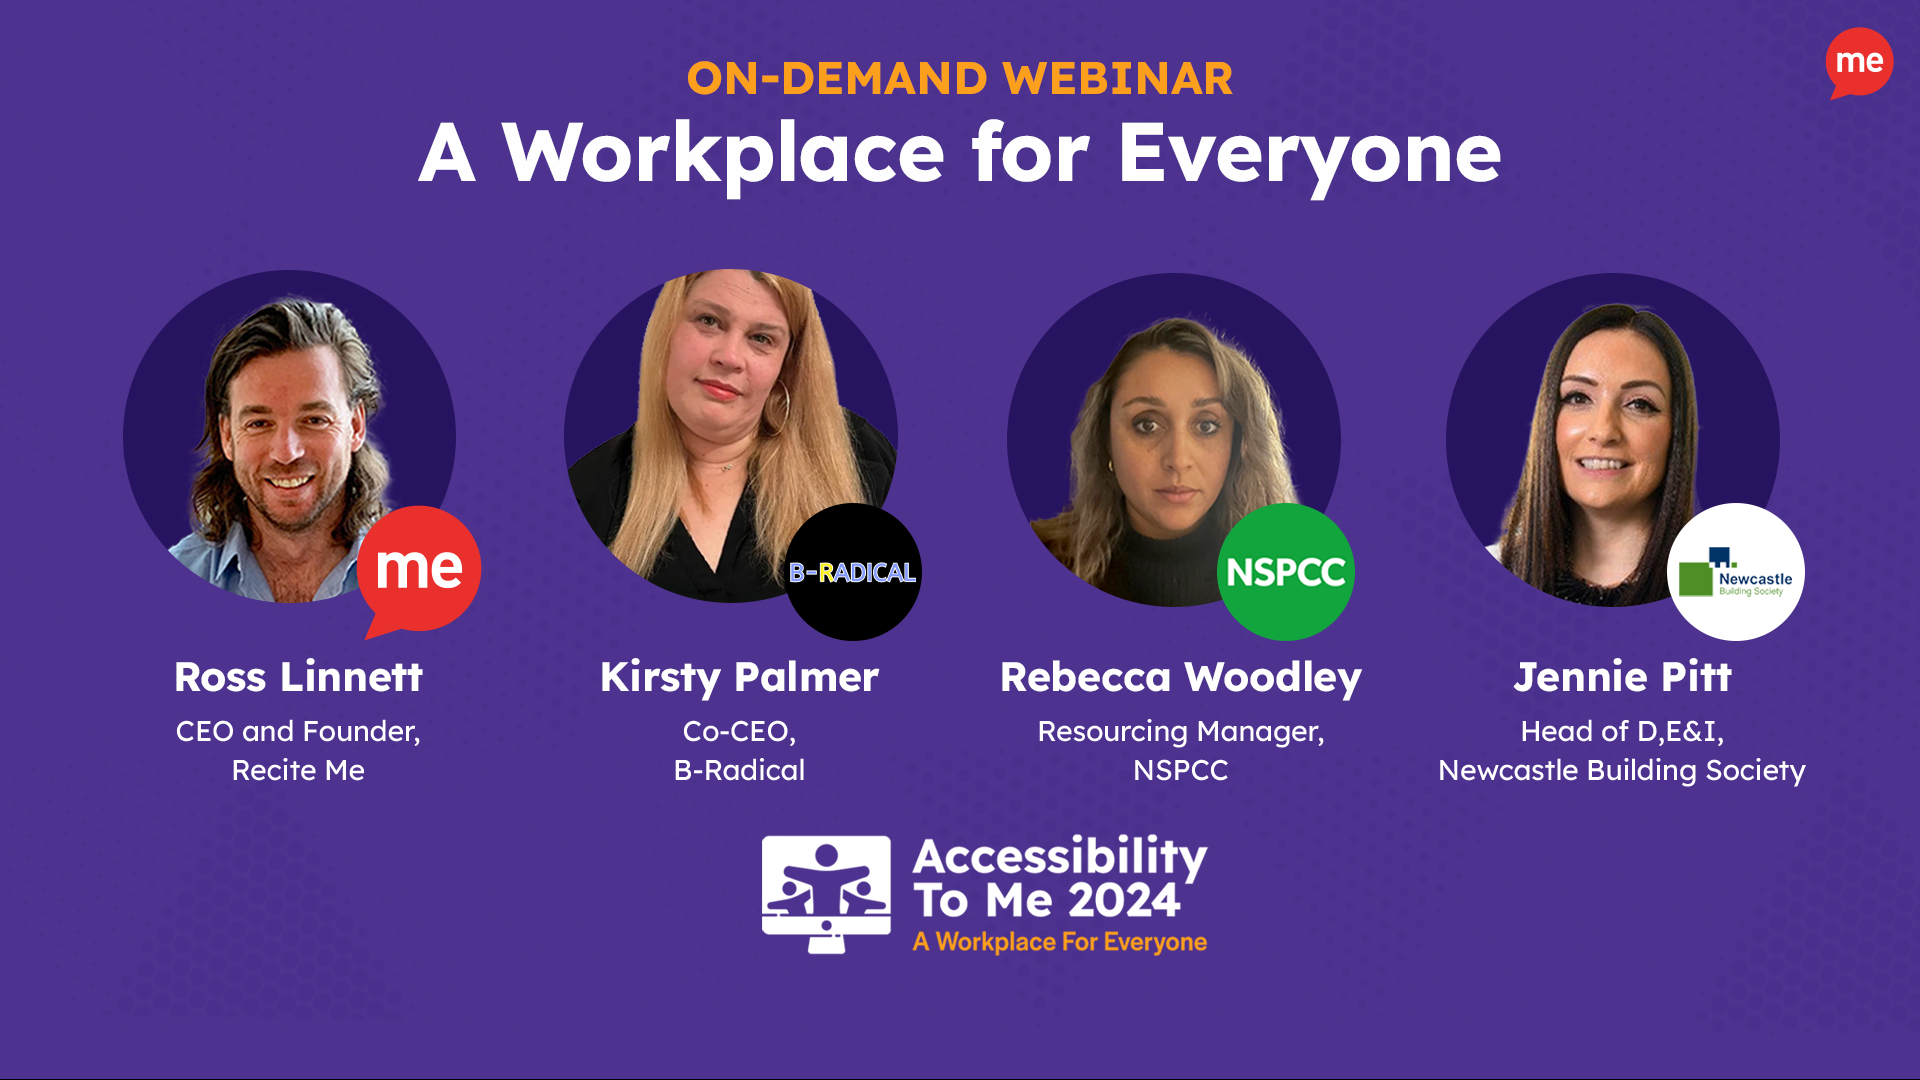 On-Demand Webinar: A Workplace for Everyone